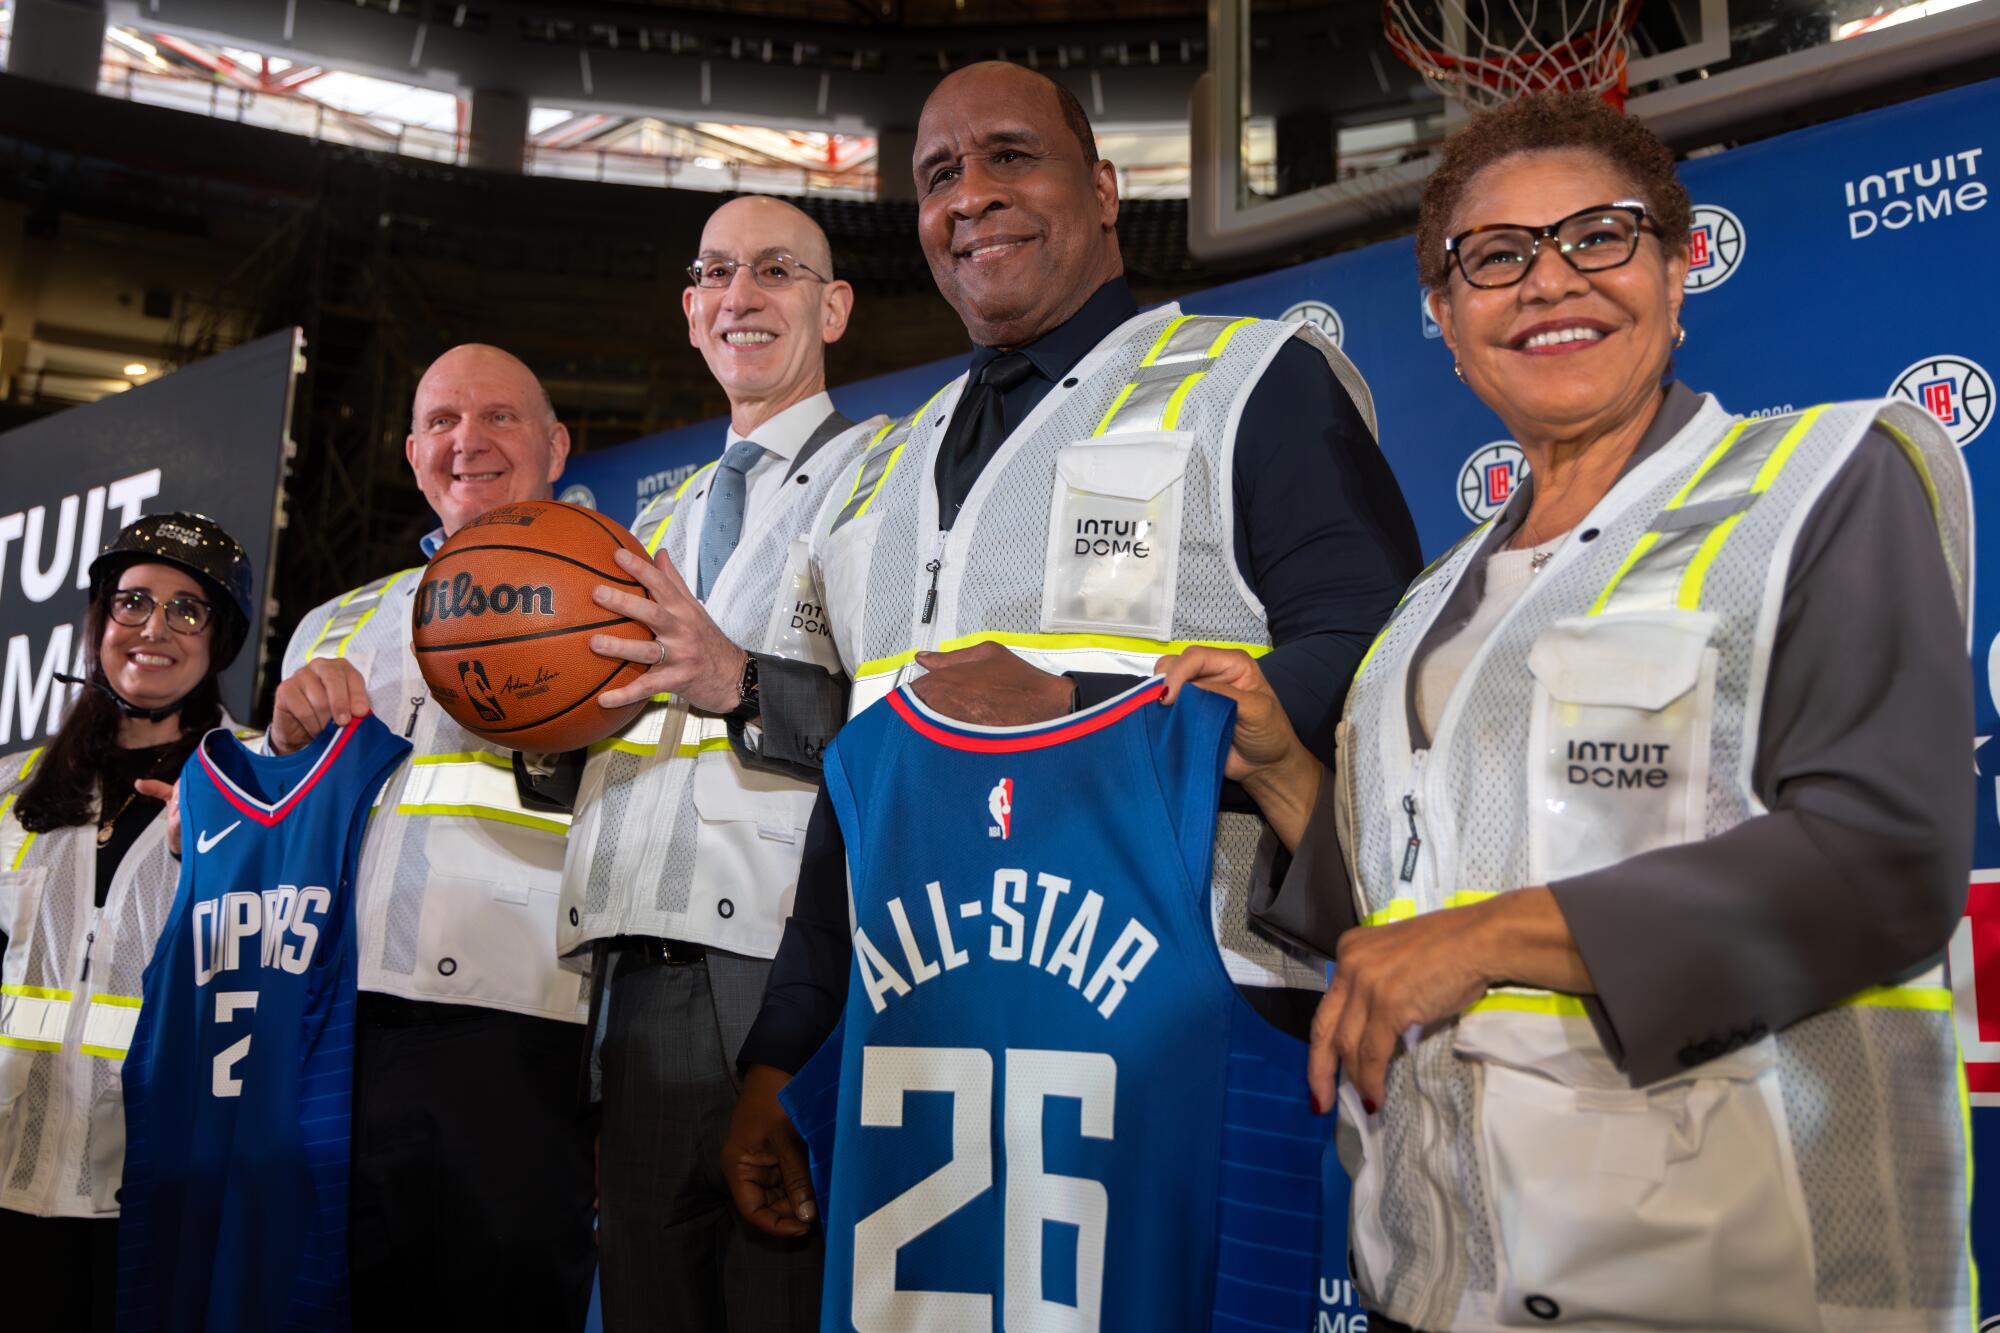 Dignitaries, including NBA Commissioner Adam Silver, center, pose for a photo during a news conference at the Intuit Dome.